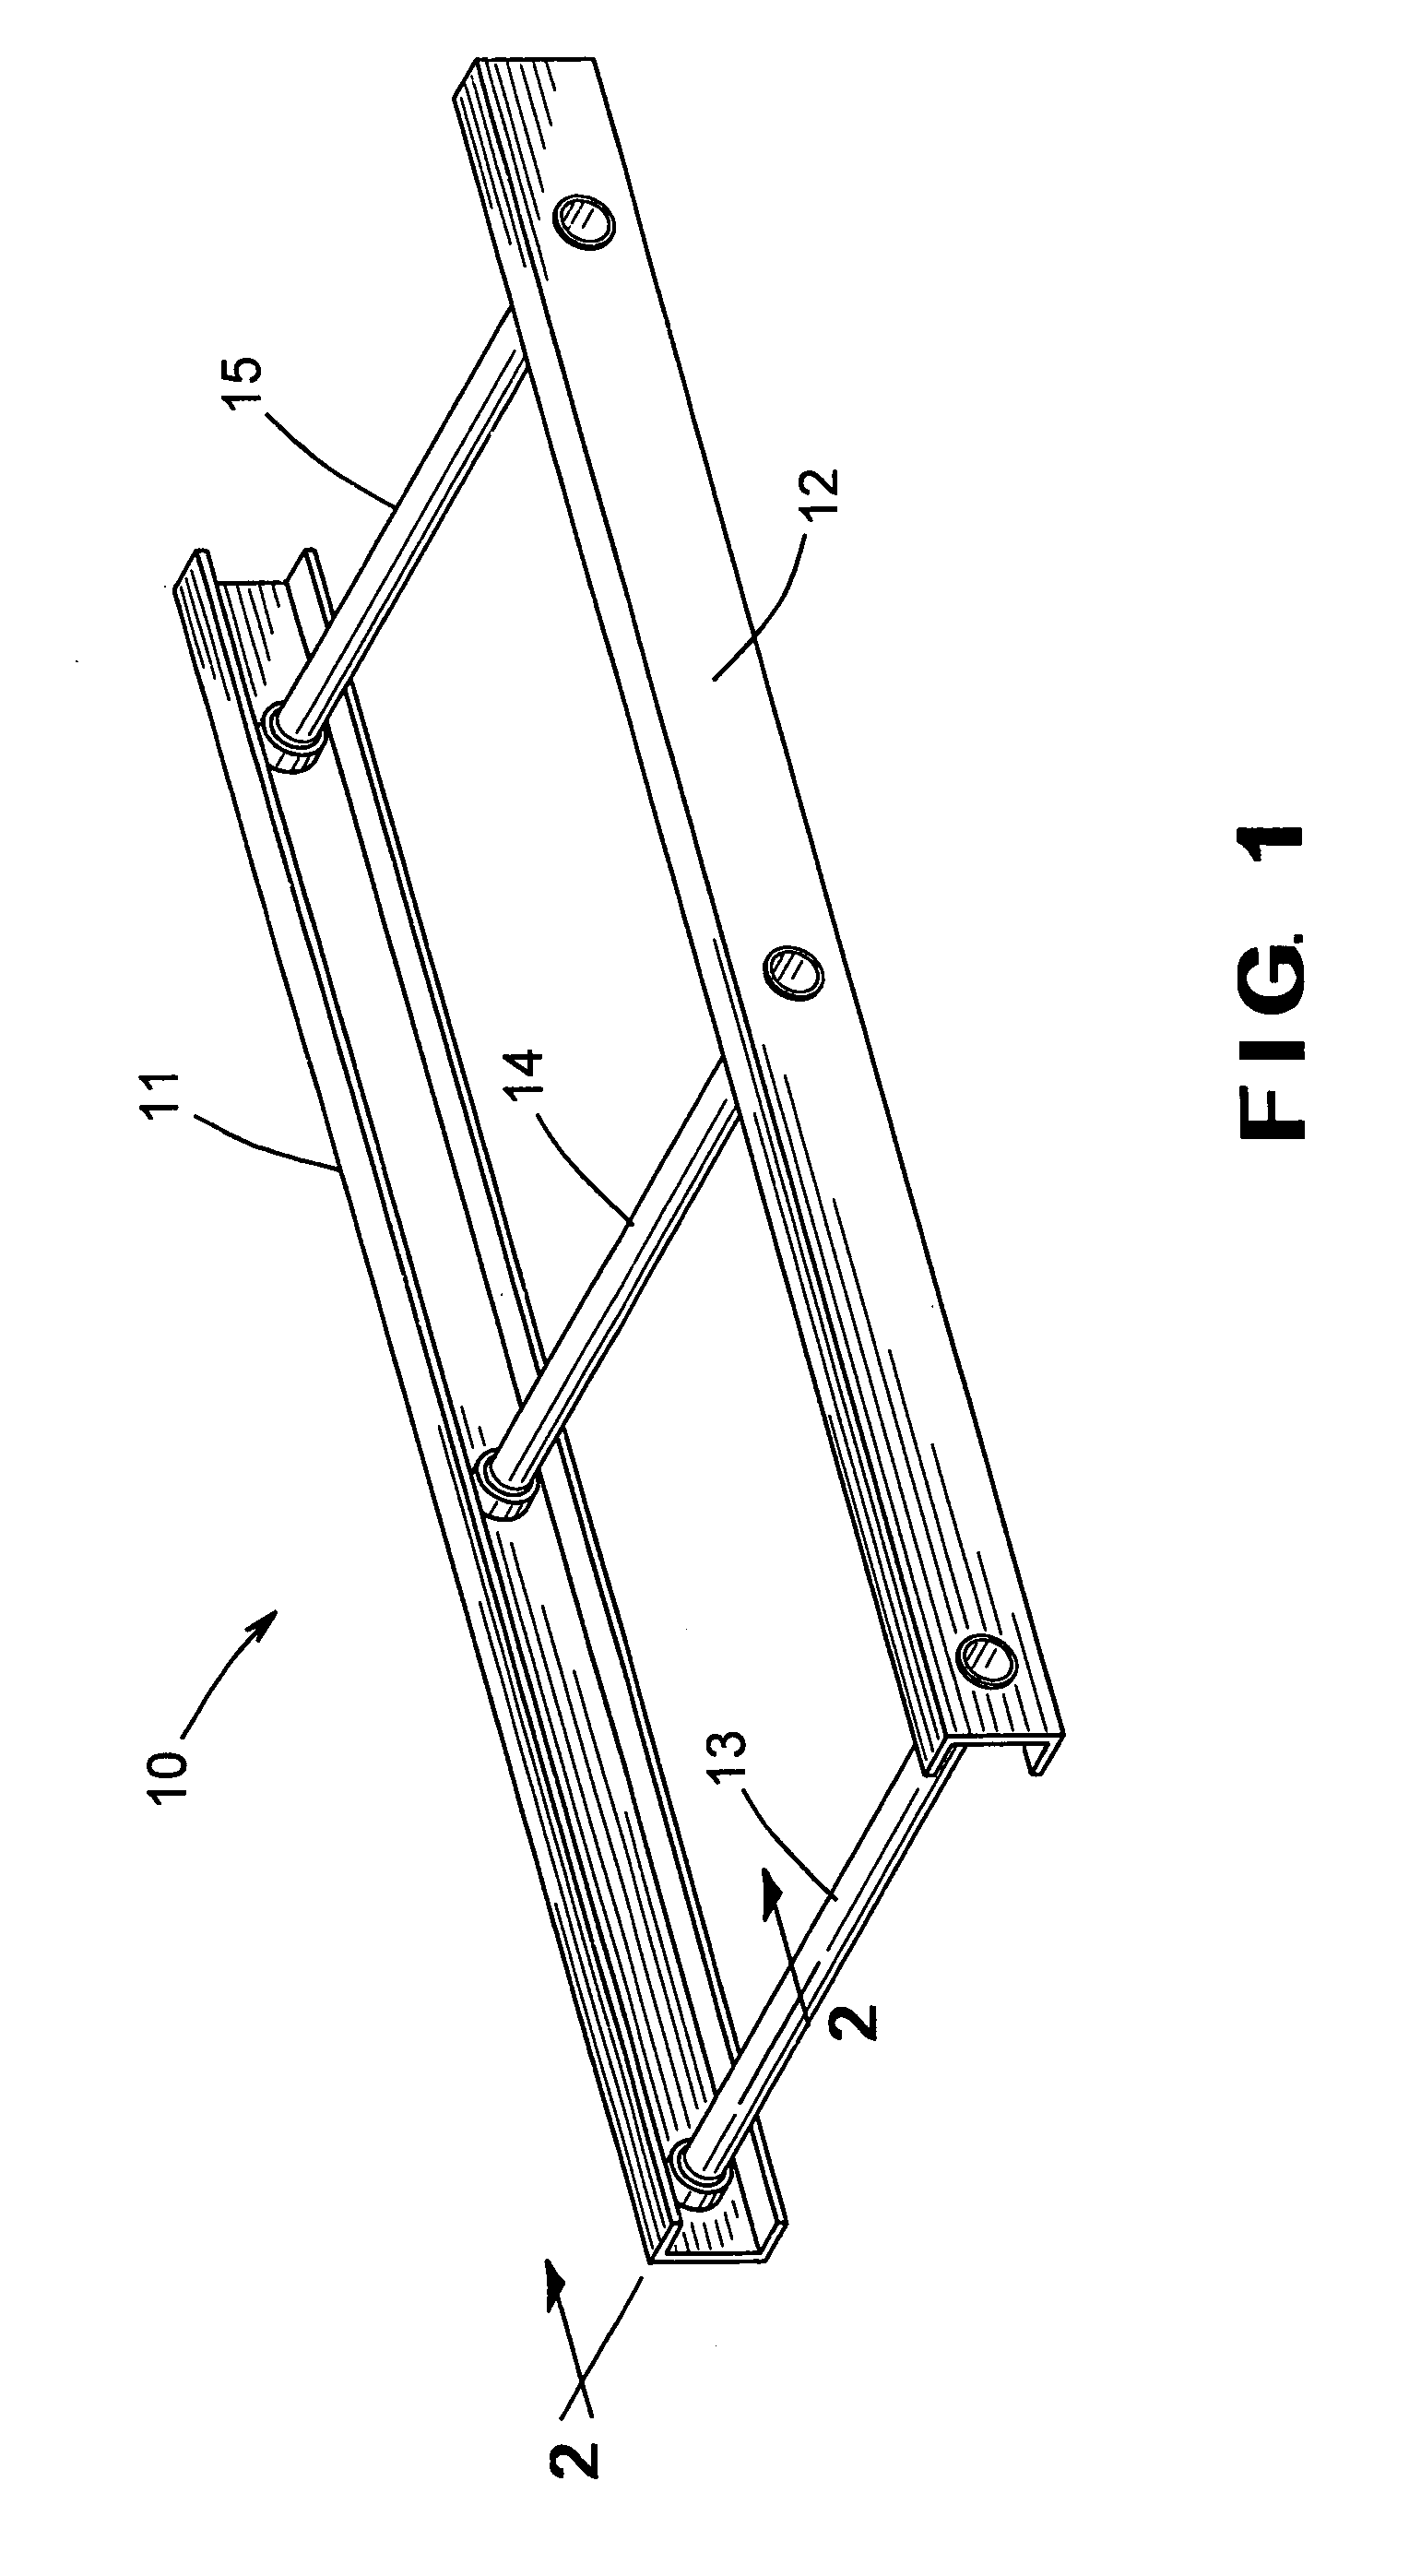 Method and apparatus for performing a magnetic pulse welding operation